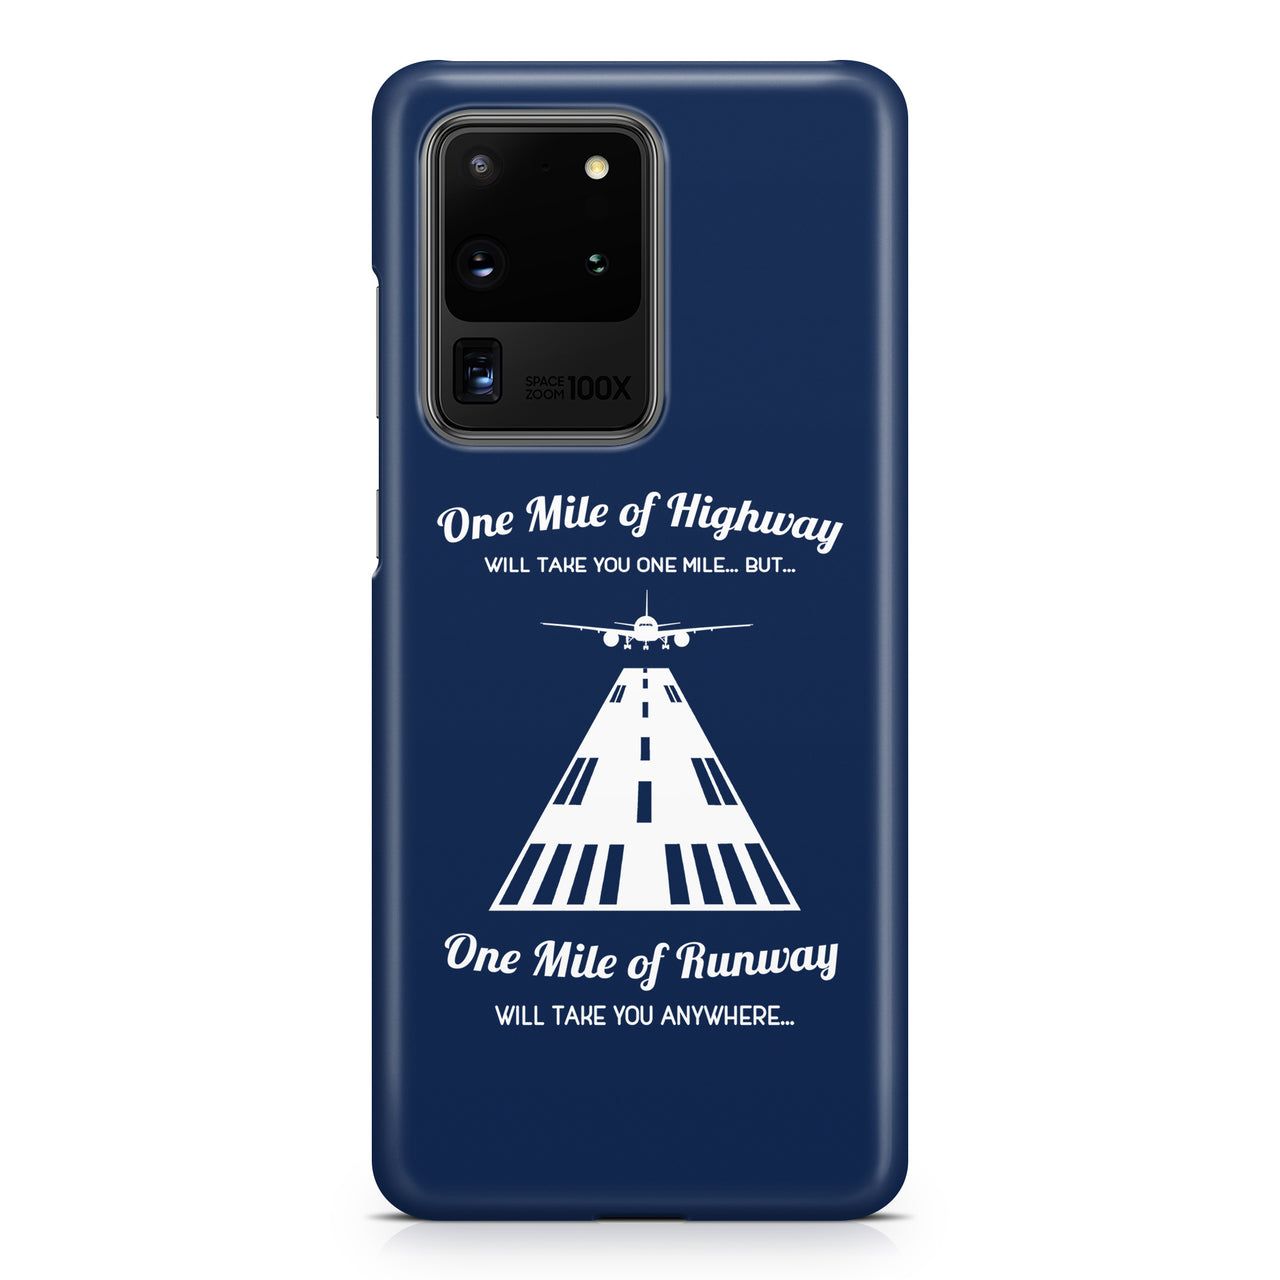 One Mile of Runway Will Take you Anywhere Samsung A Cases